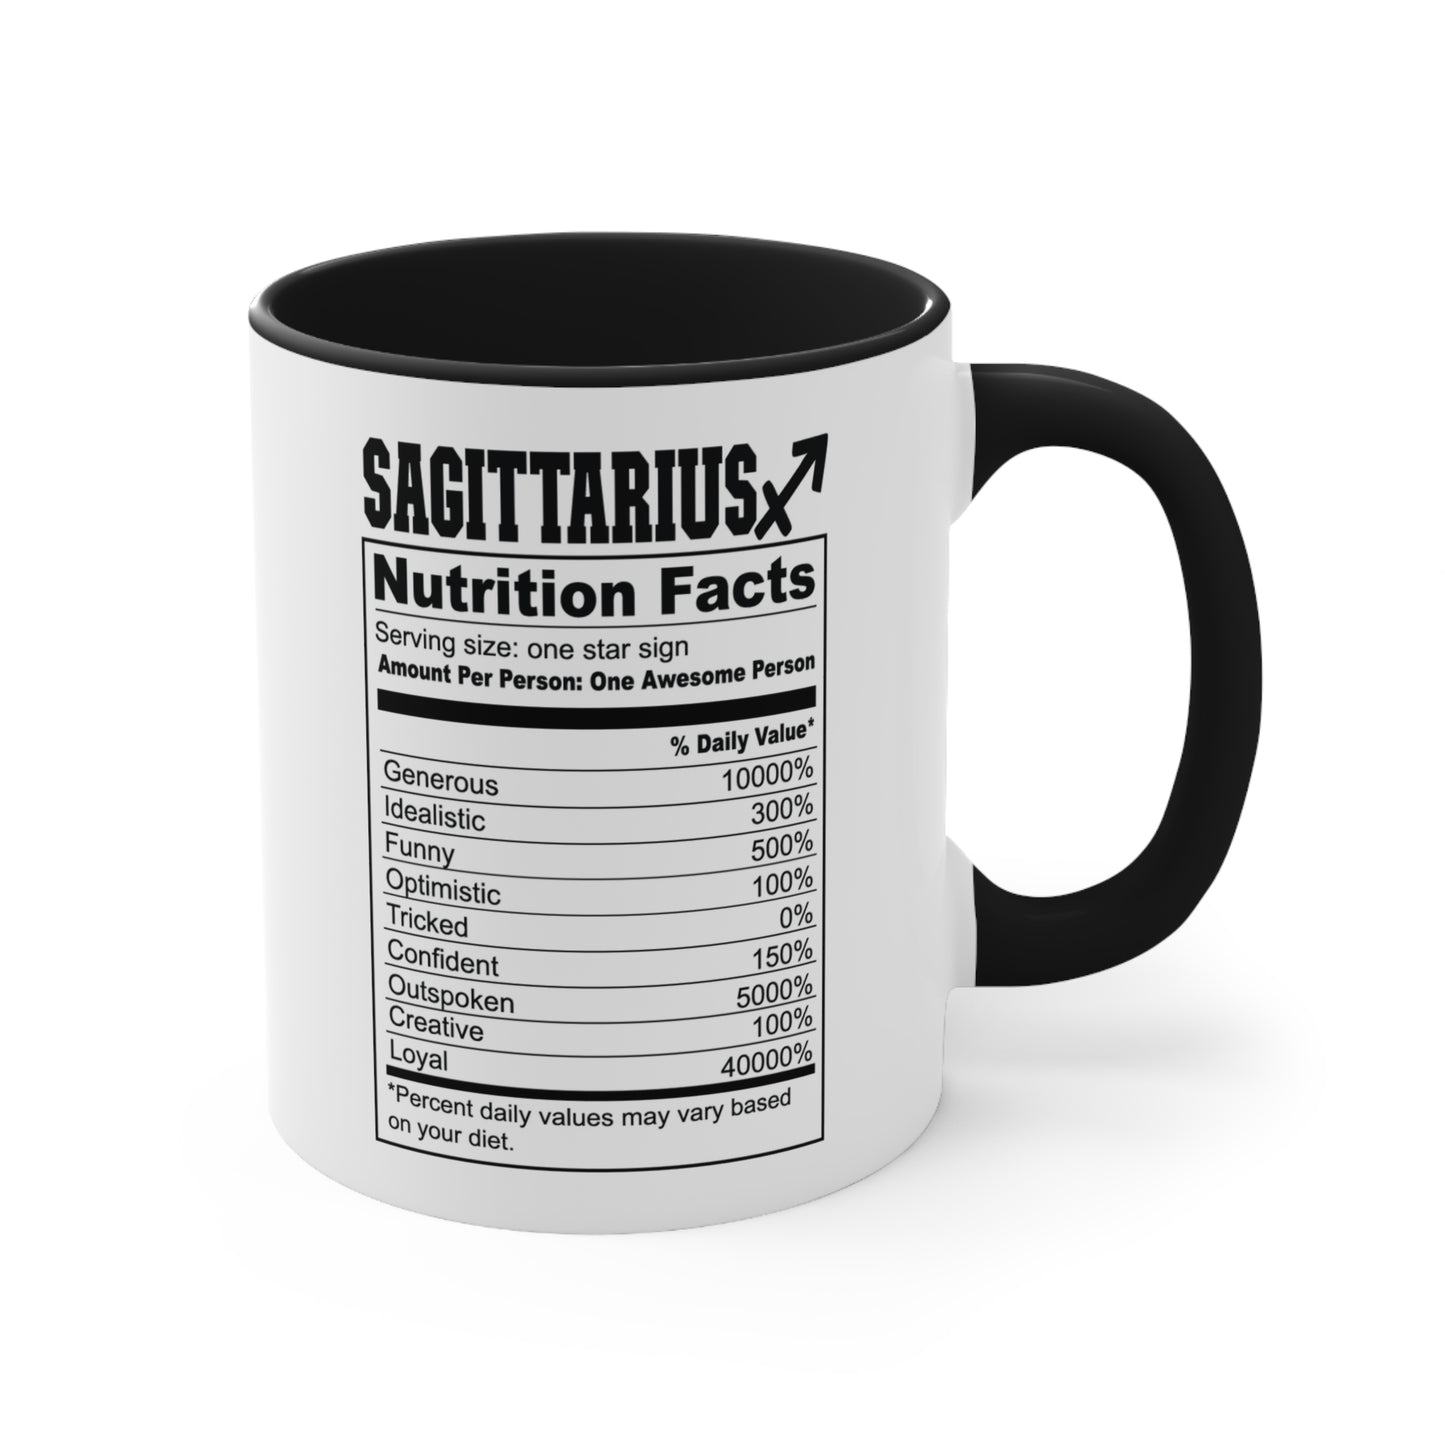 This listing is for a Premium Quality 11oz Black Accent White Ceramic coffee / tea mug with a double sided Sagittarius Tarot Card